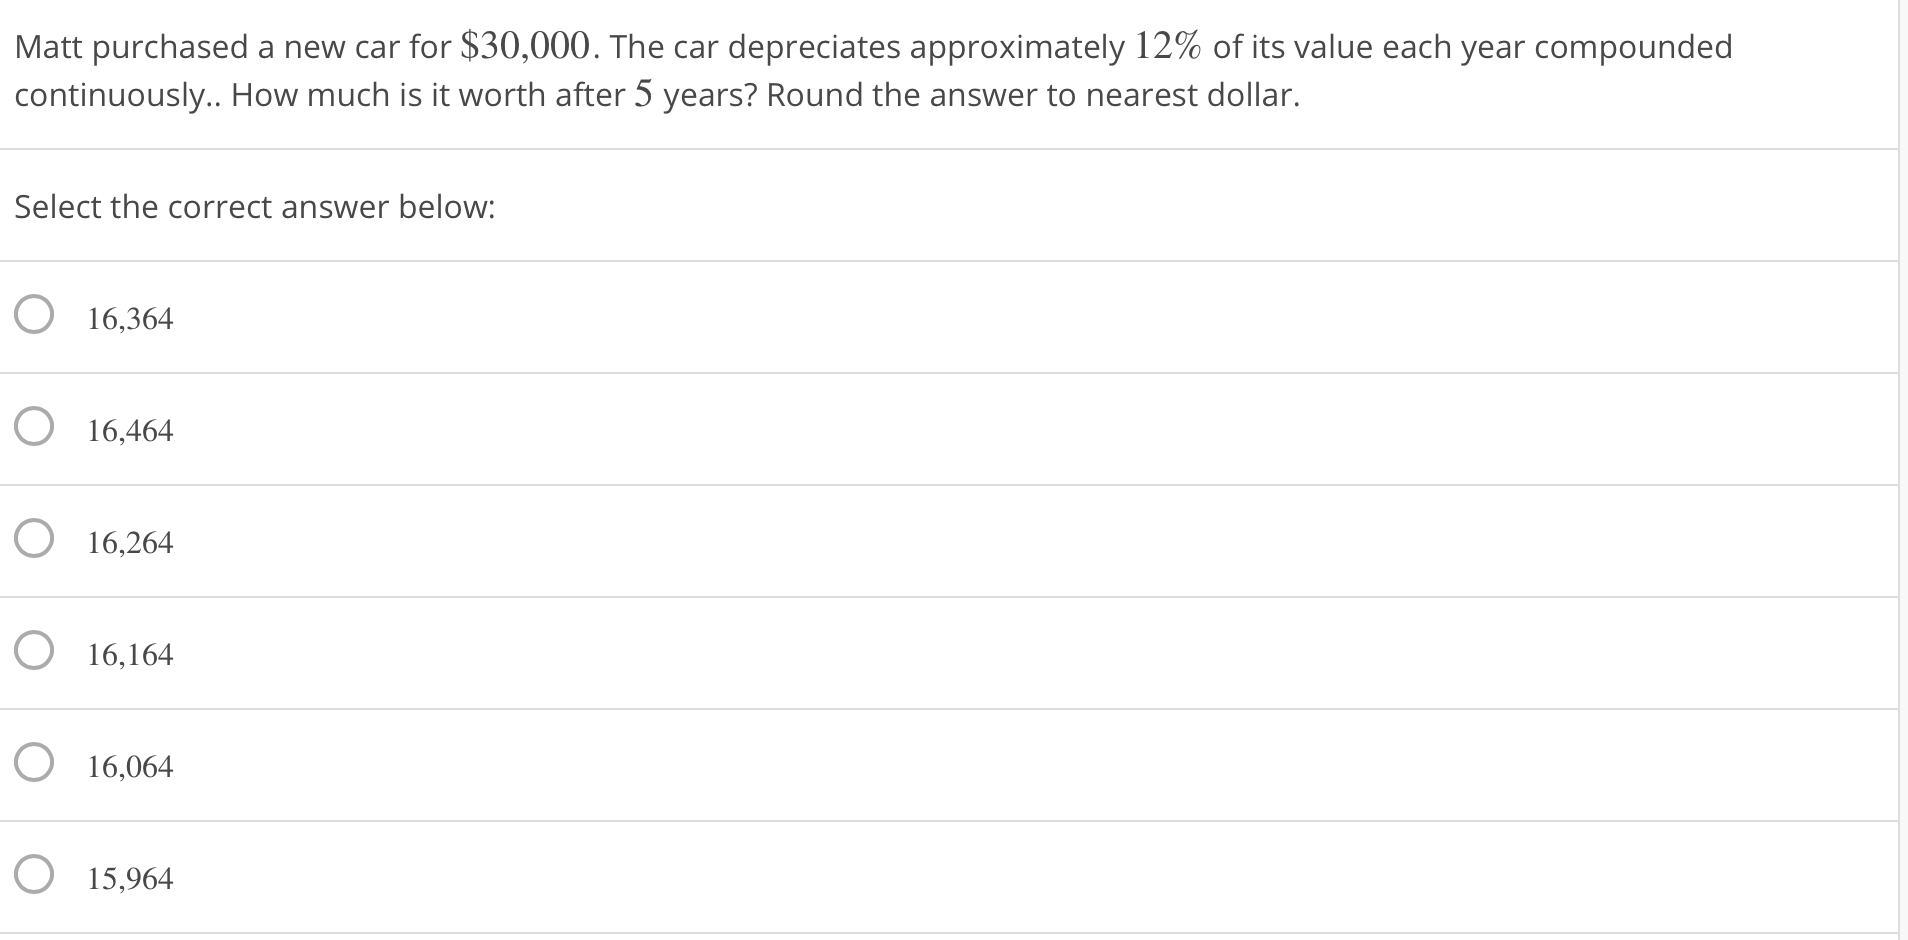 Matt purchased a new car for $30,000. The car depreciates approximately 12% of its value each yea
continuously.. How much is it worth after 5 years? Round the answer to nearest dollar.
Select the correct answer below:
16,364
O 16,464
O 16,264
O 16,164
O 16,064
15,964
